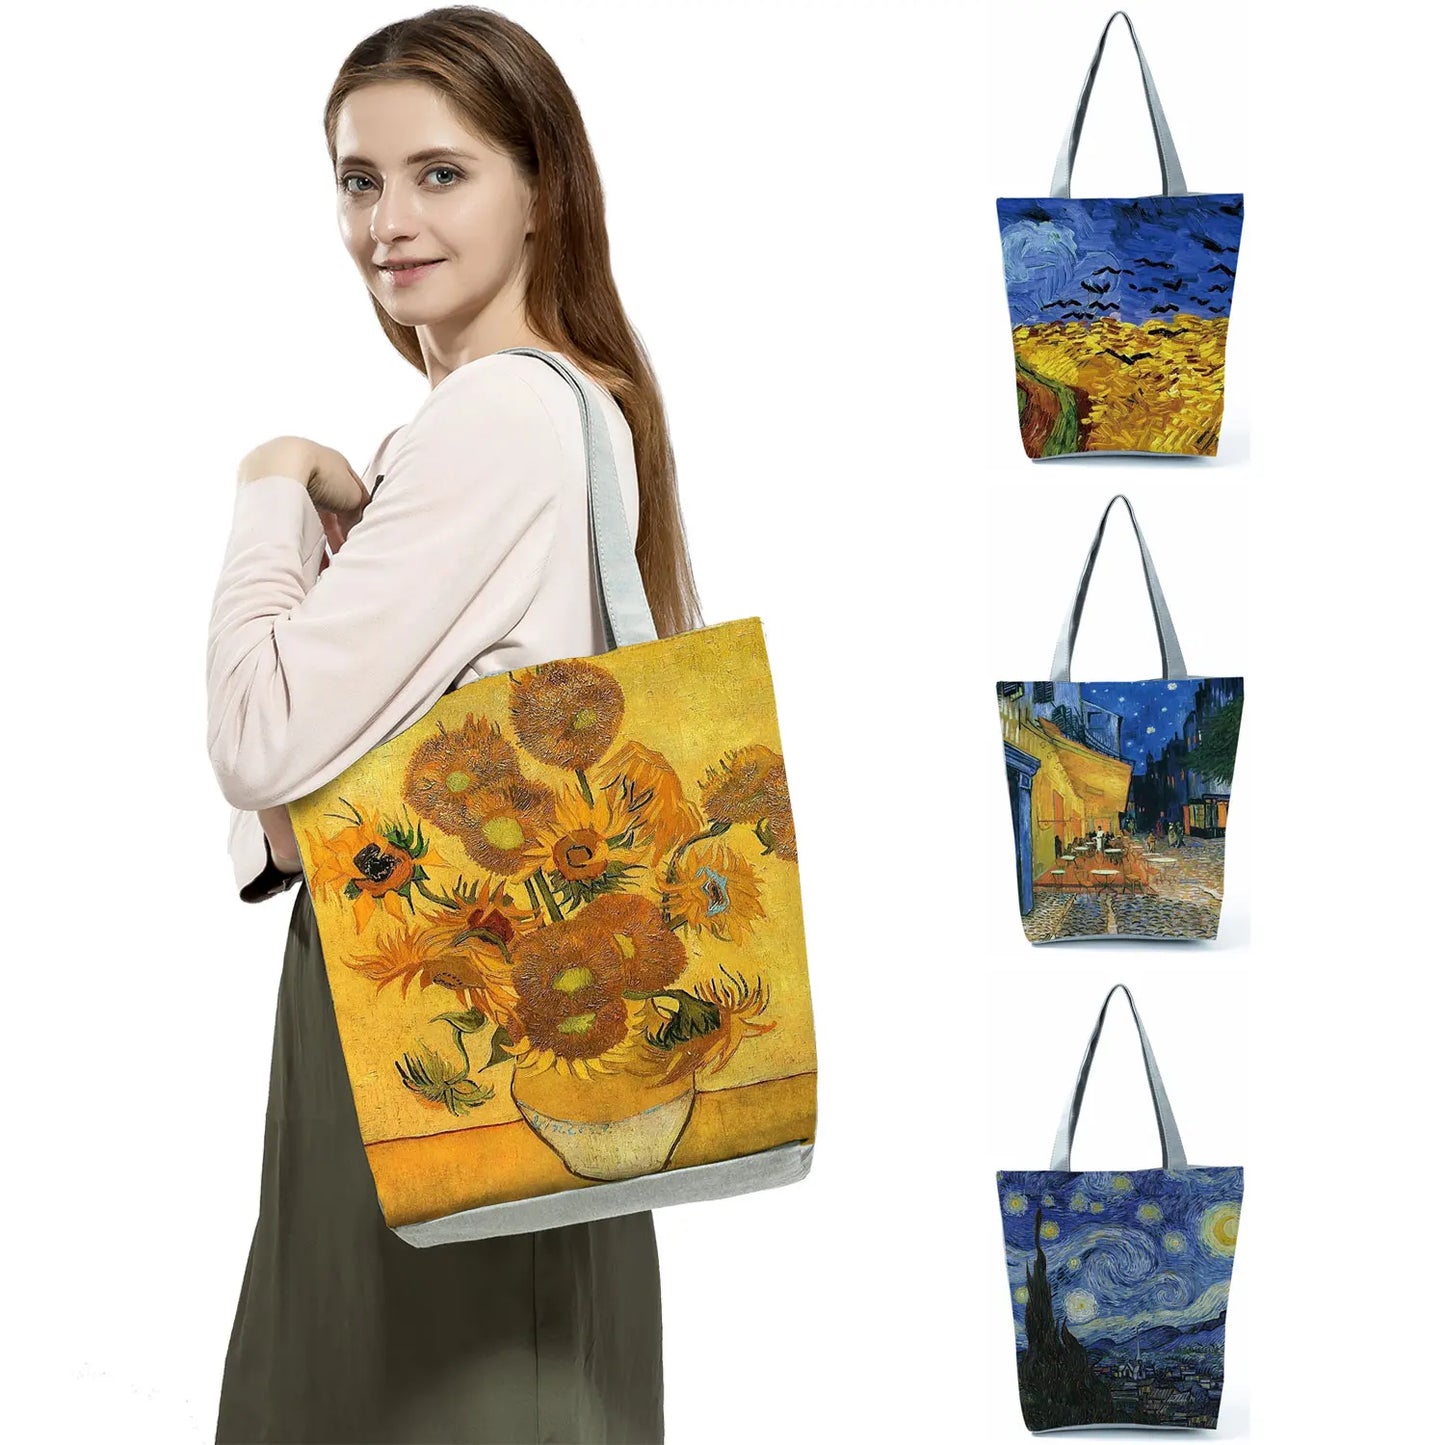 Van Gogh Oil Painting Tote Bag: A Blend of Art and Fashion!